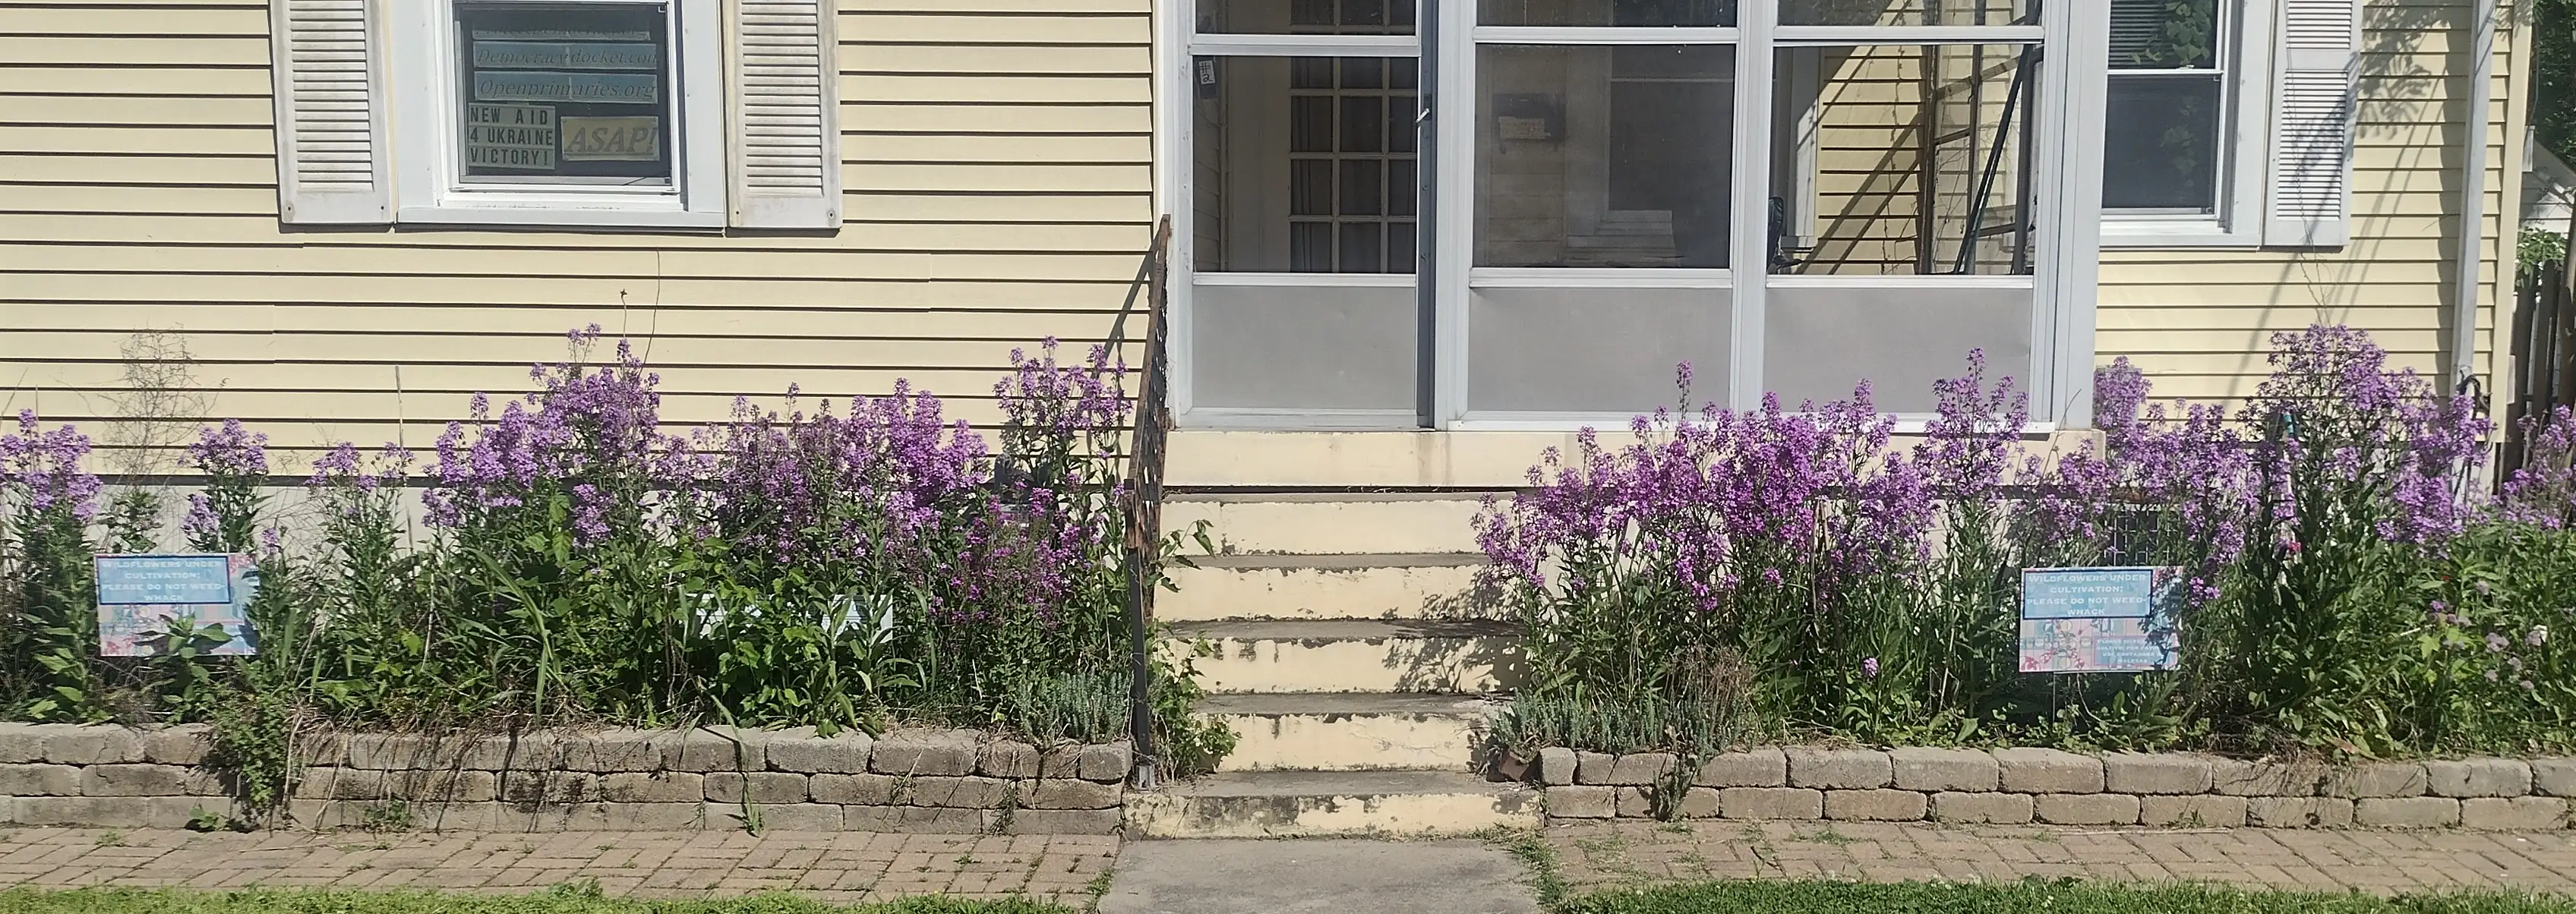 dames rocket purple mass flowering in front beds plus window signiage including 'protectdemocracy.org' and a light up letterbox saying 'new aid 4 ukraine victory' next to 'ASAP!